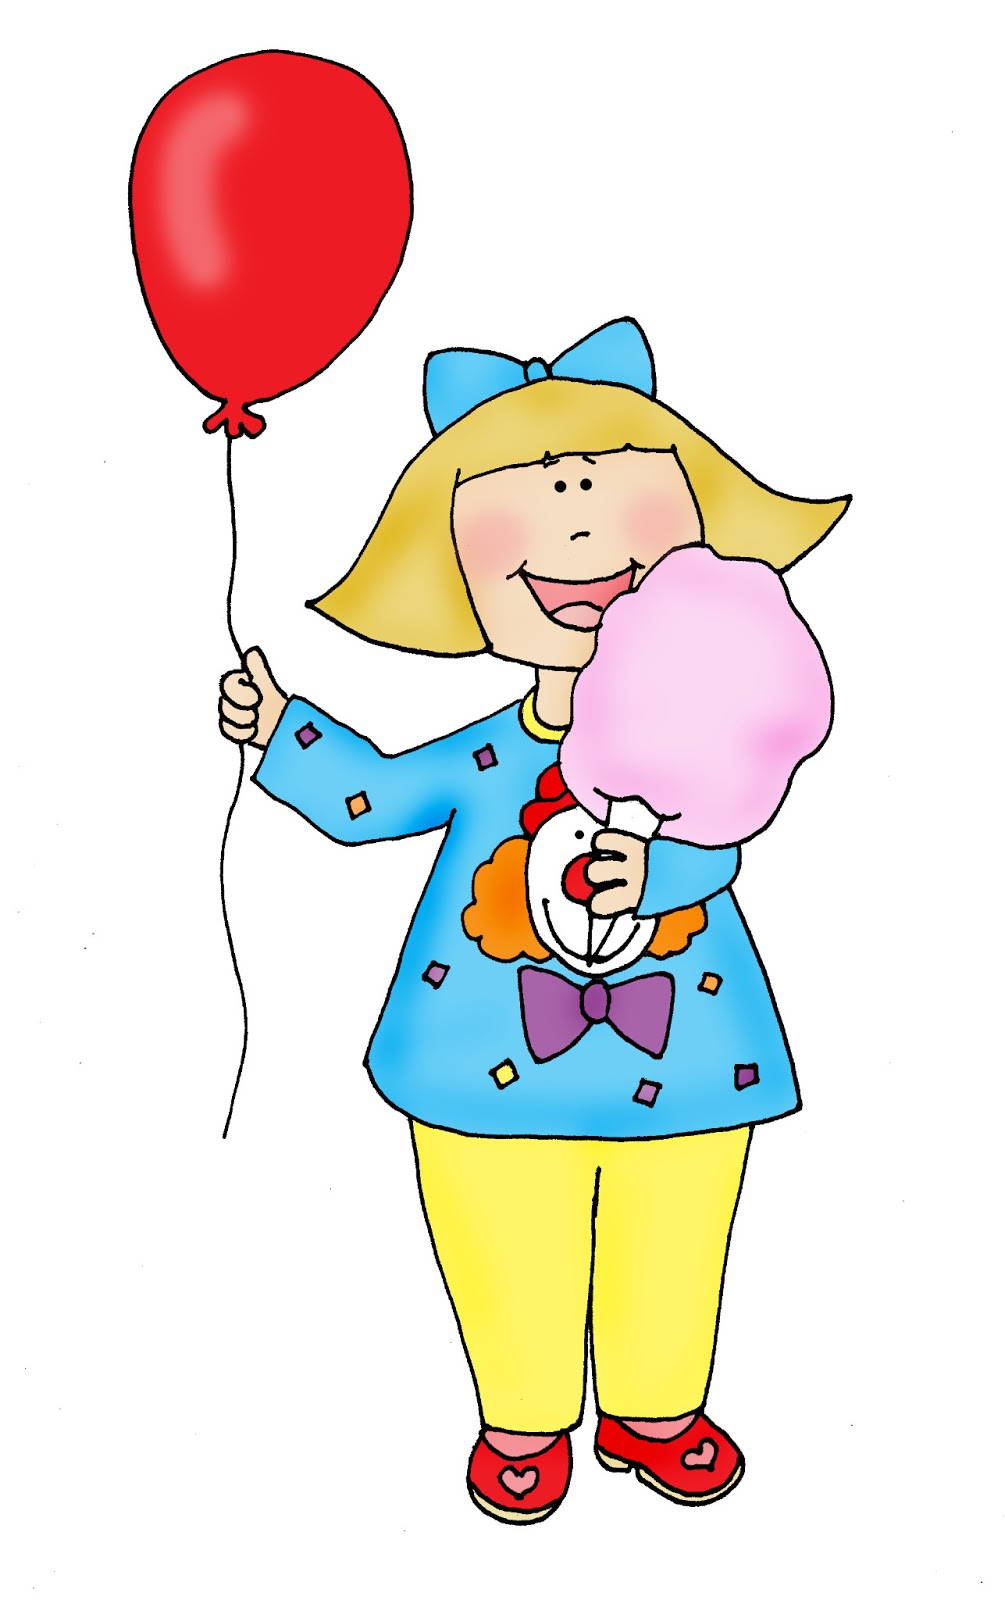 free-dearie-dolls-digi-stamps-circus-cotton-candy-color-and-b-w